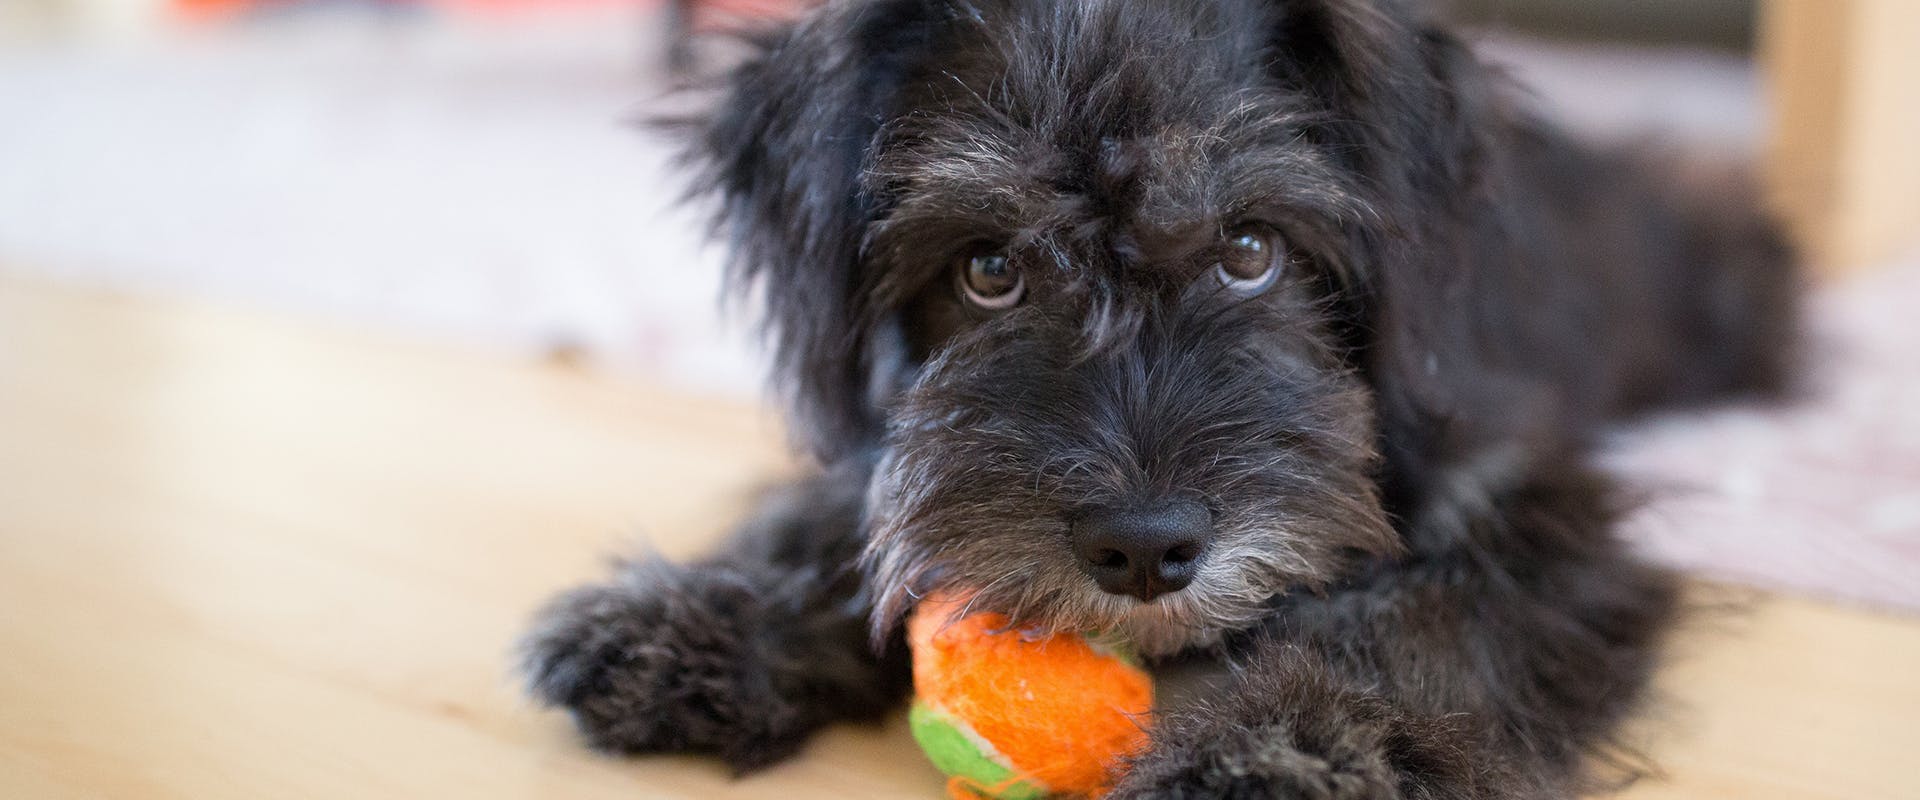 A Newfypoo puppy with a bright orange tennis ball in its mouth